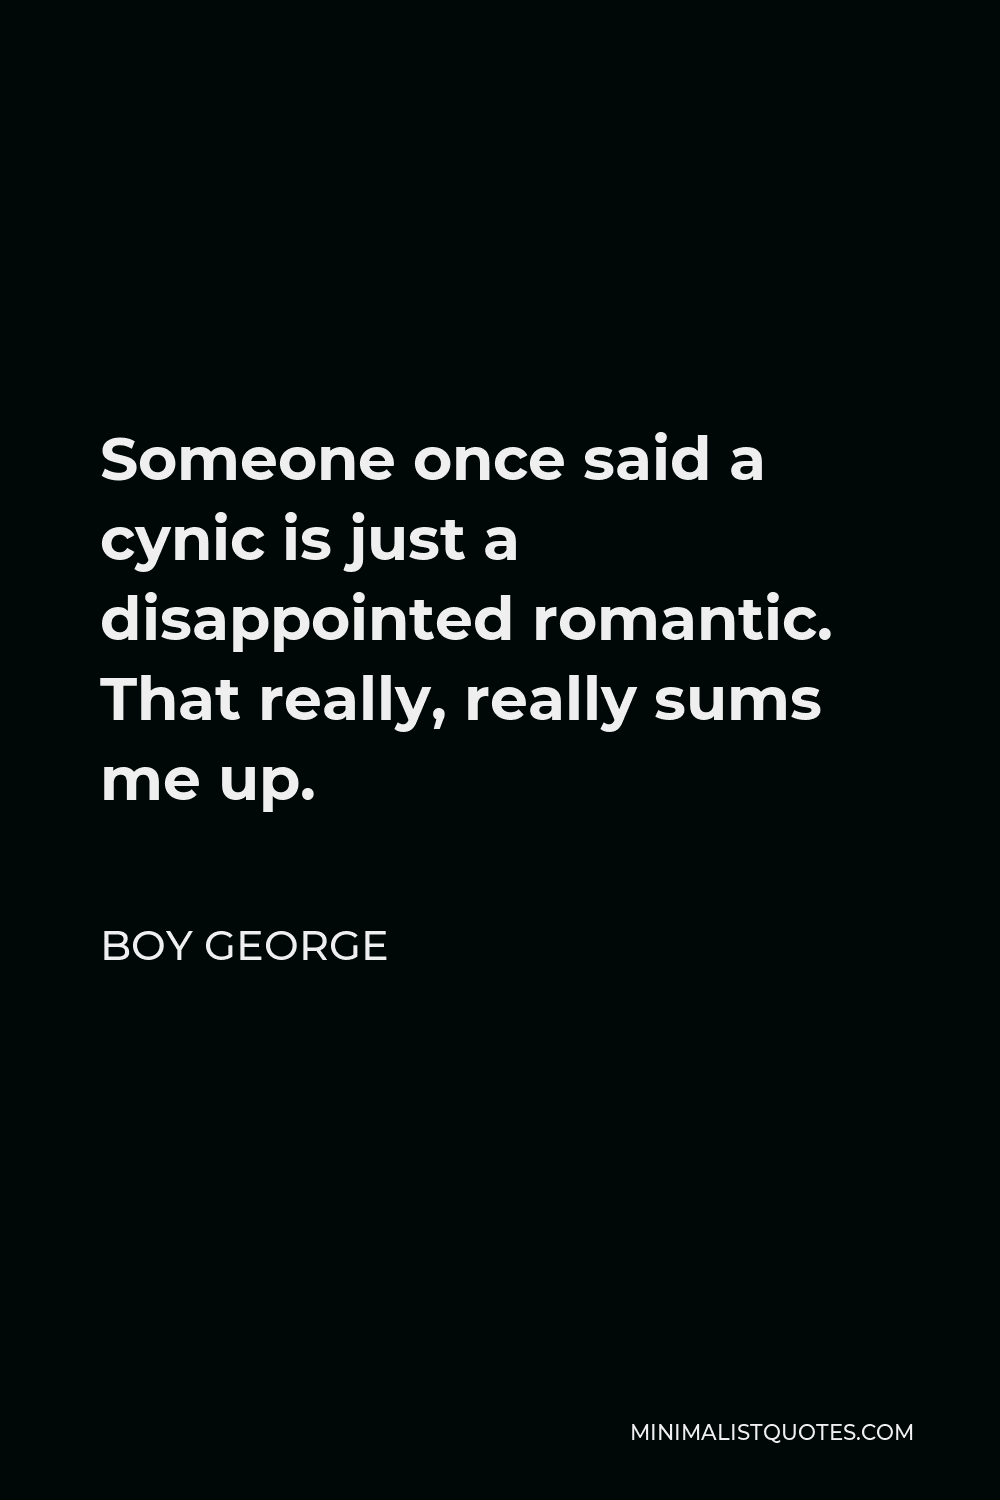 Boy George Quote - Someone once said a cynic is just a disappointed romantic. That really, really sums me up.